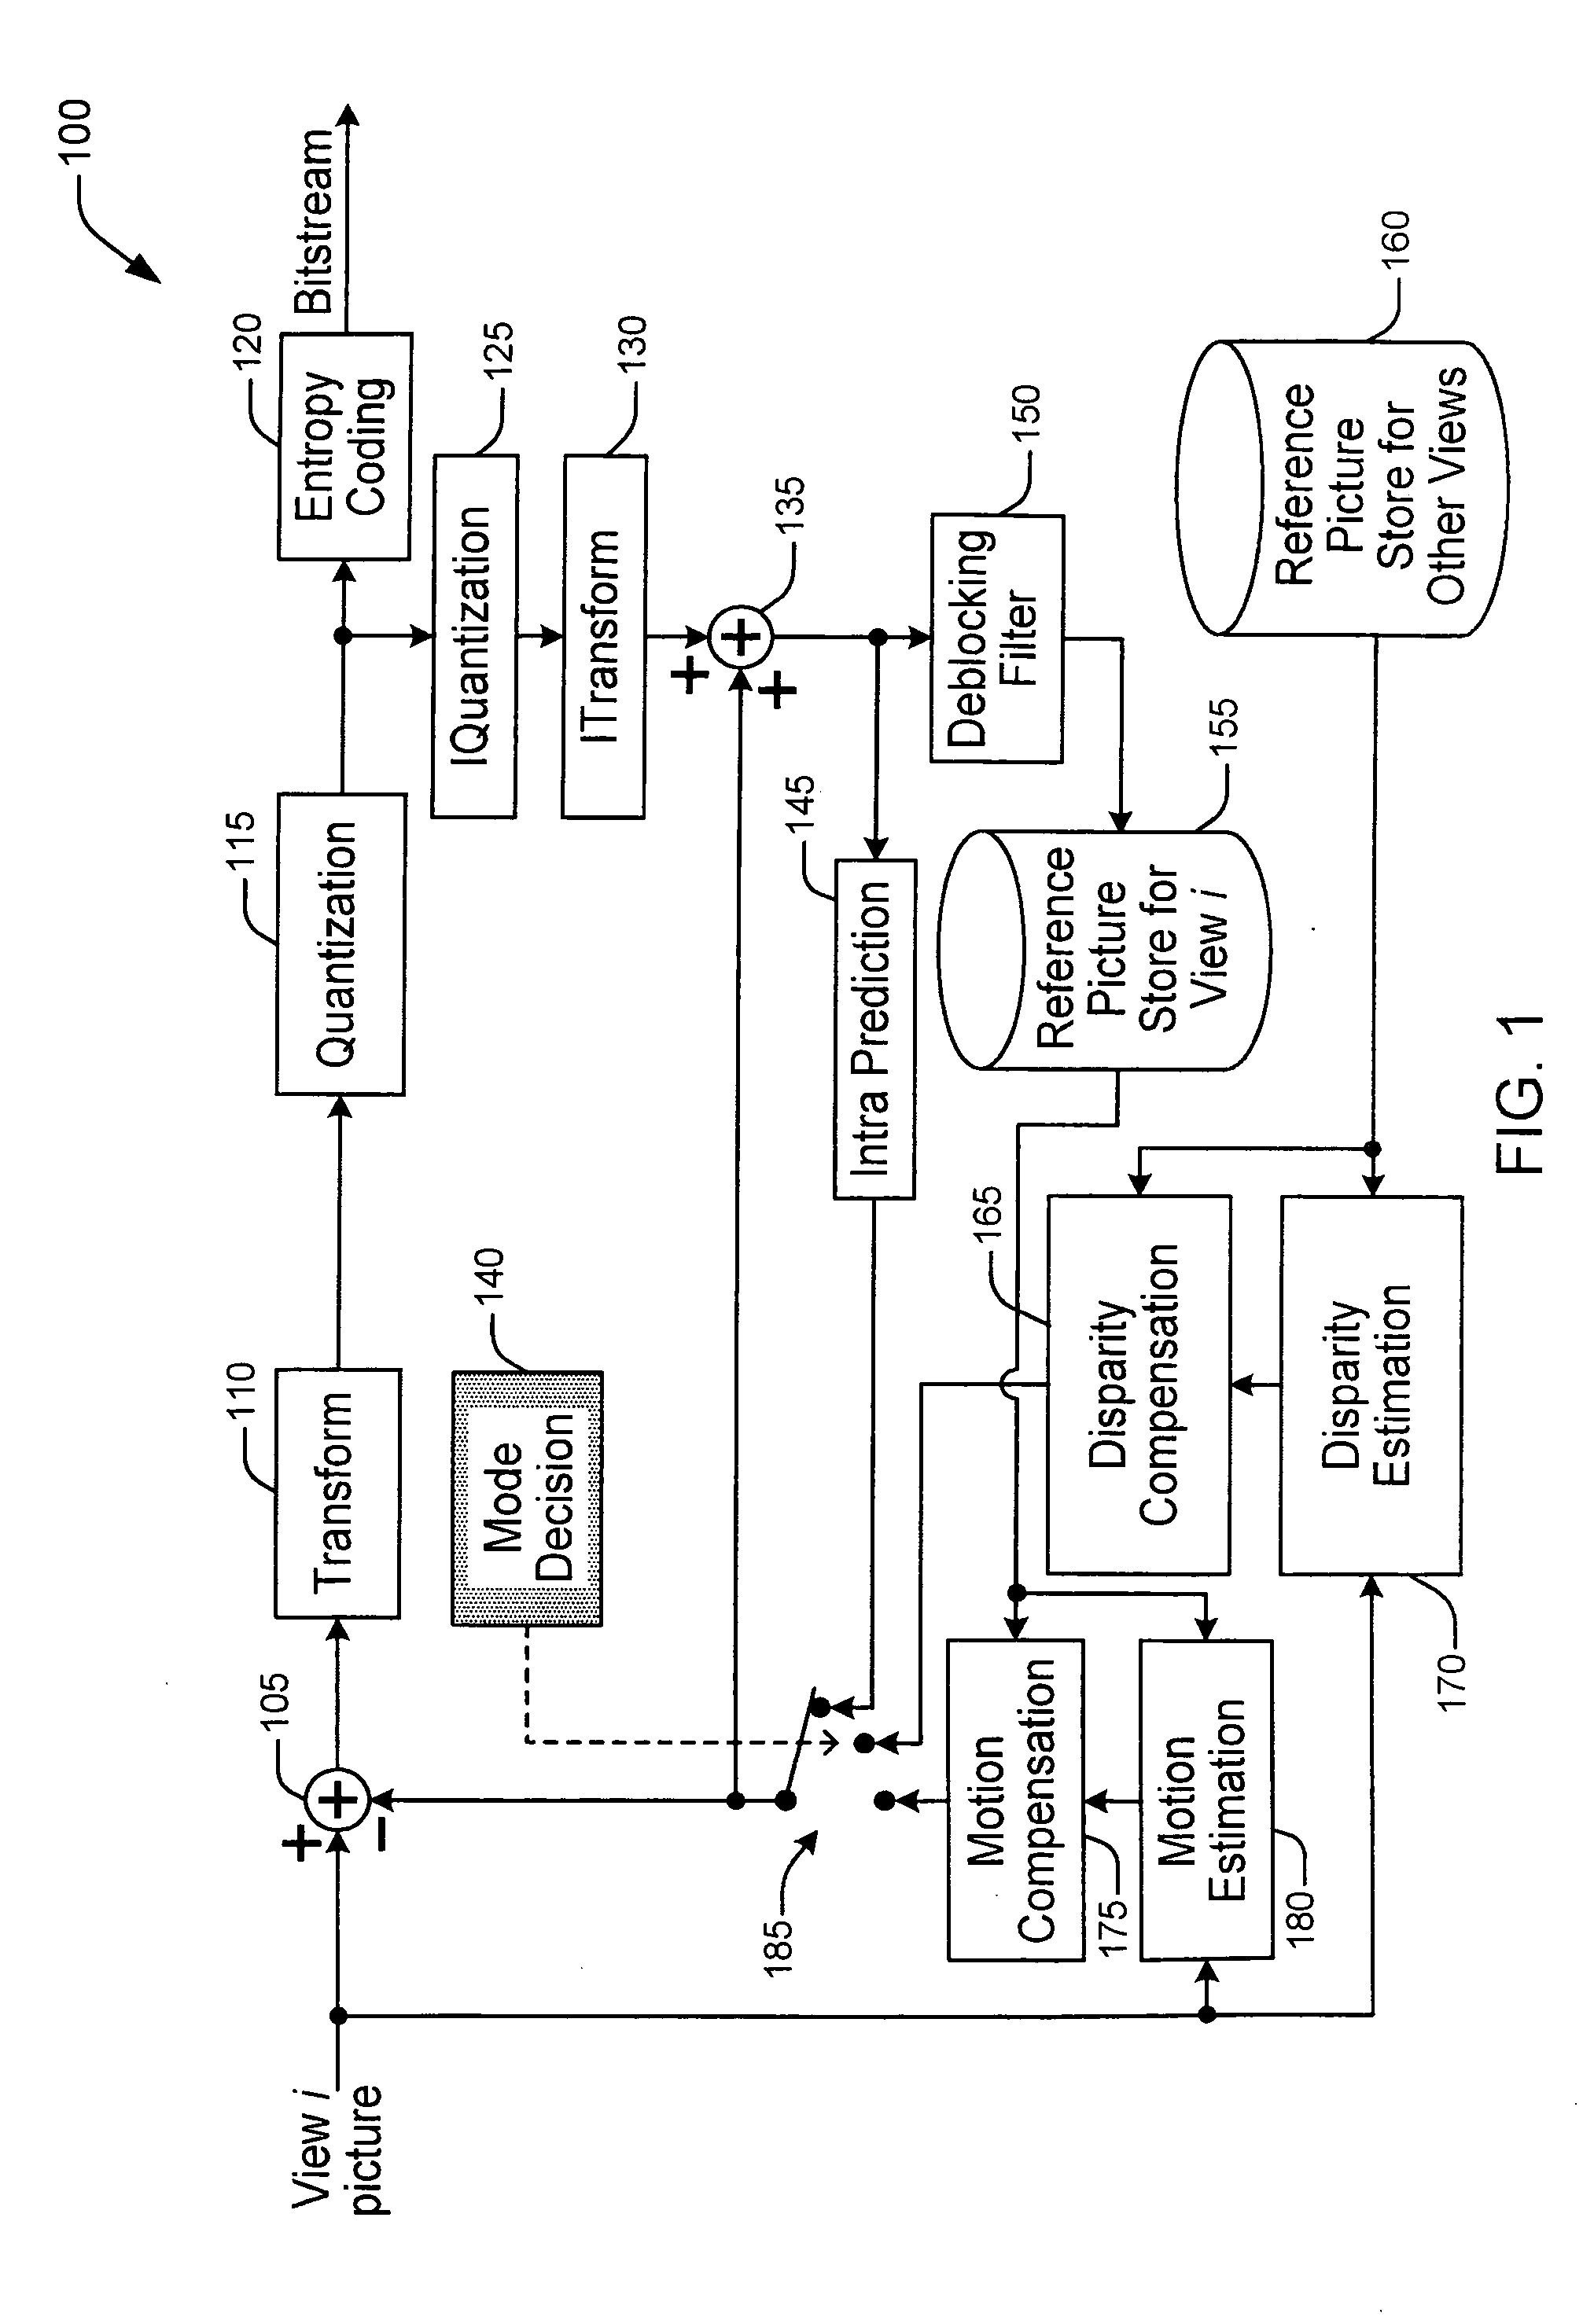 Methods and Apparatuses for Multi-View Video Coding